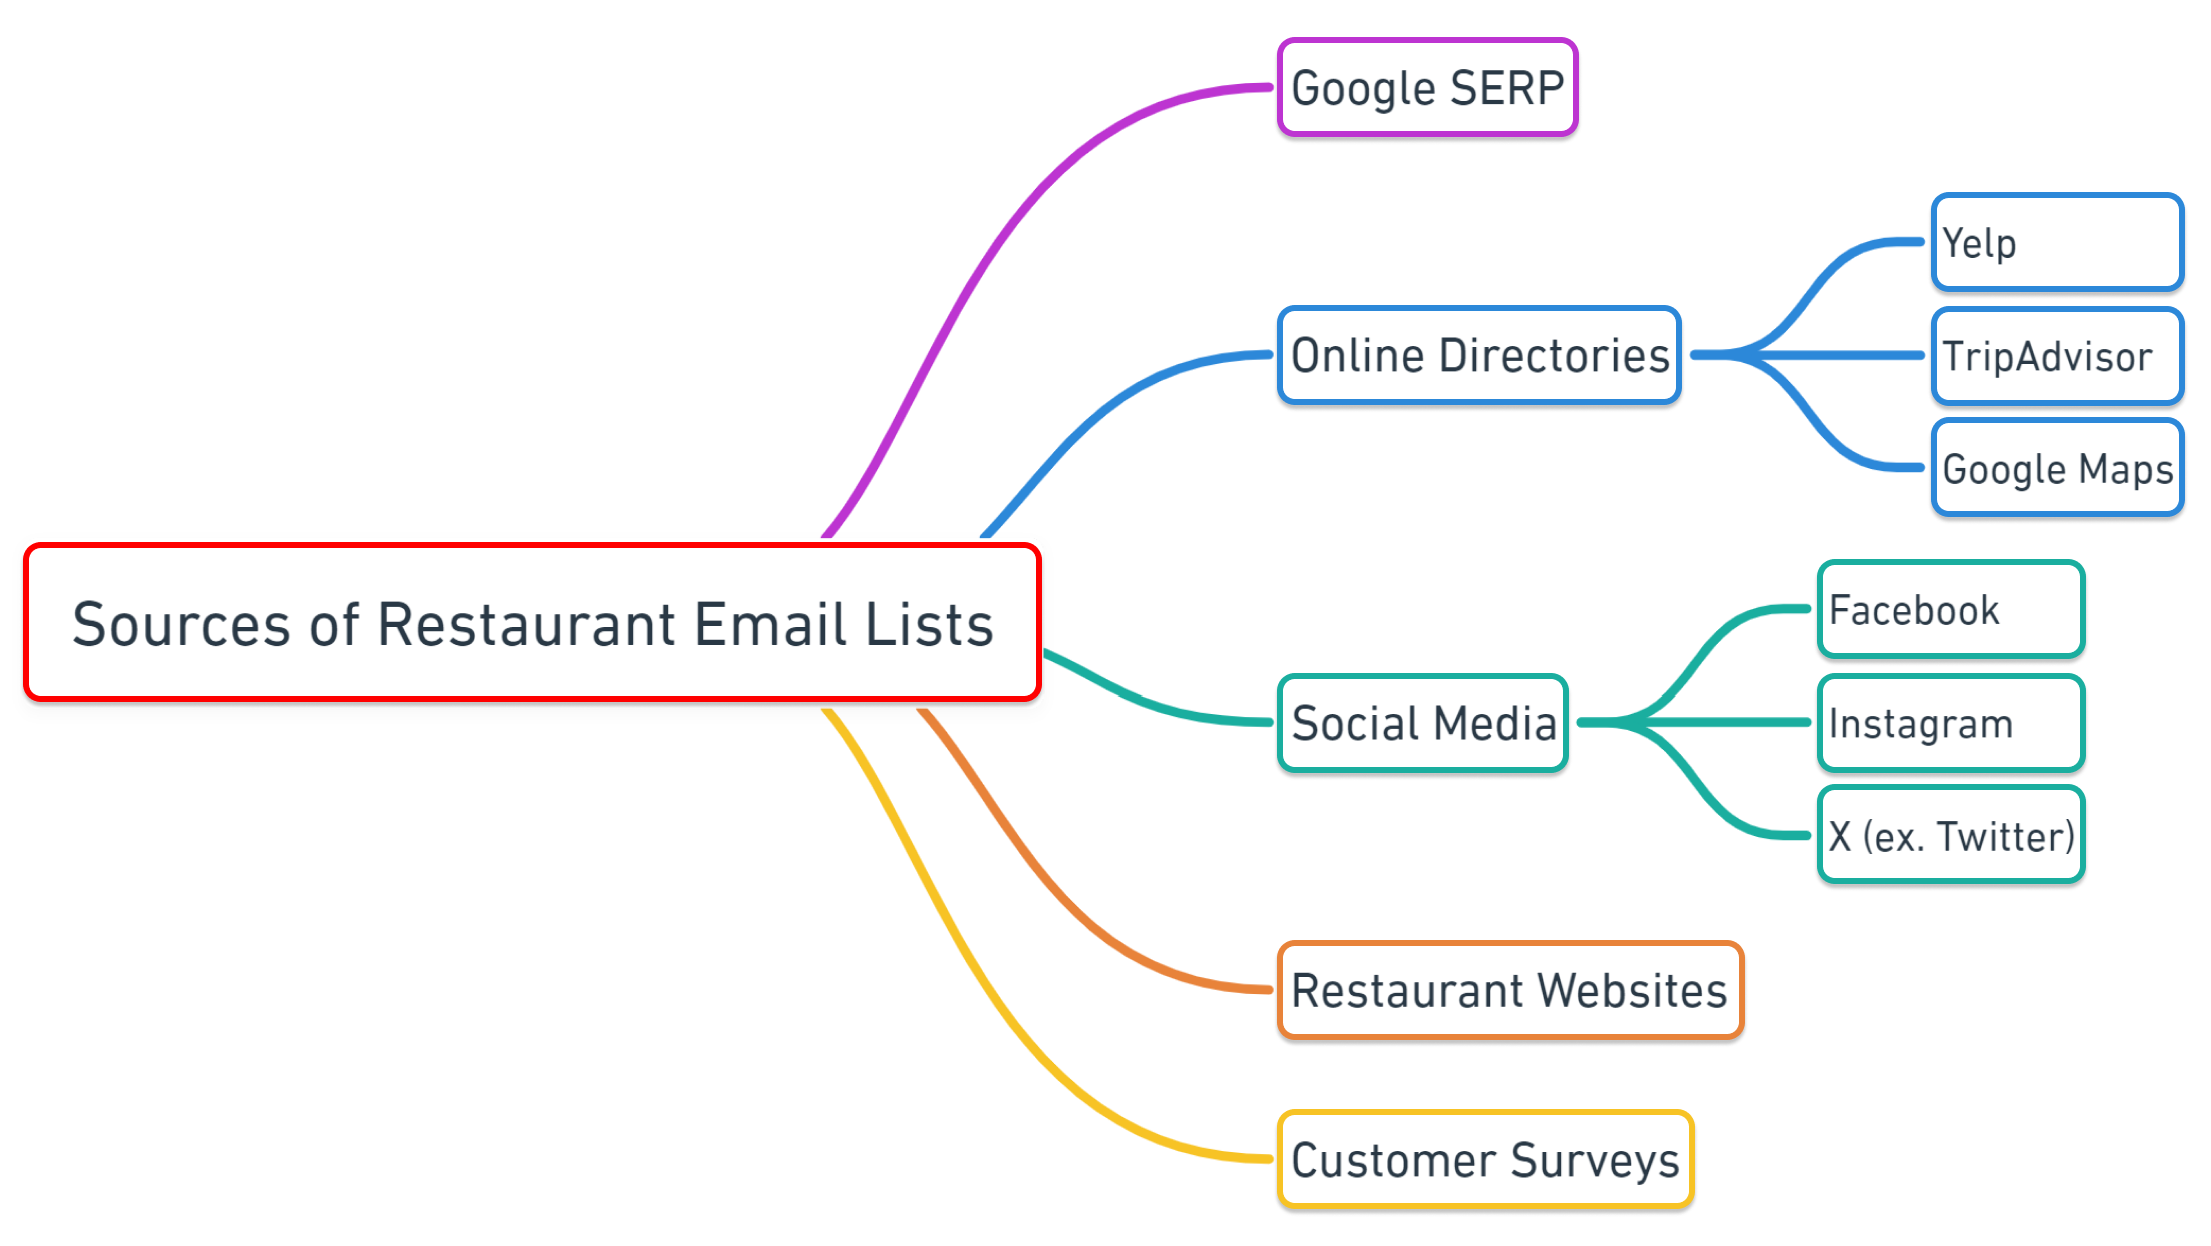 Sources of restaurant email lists